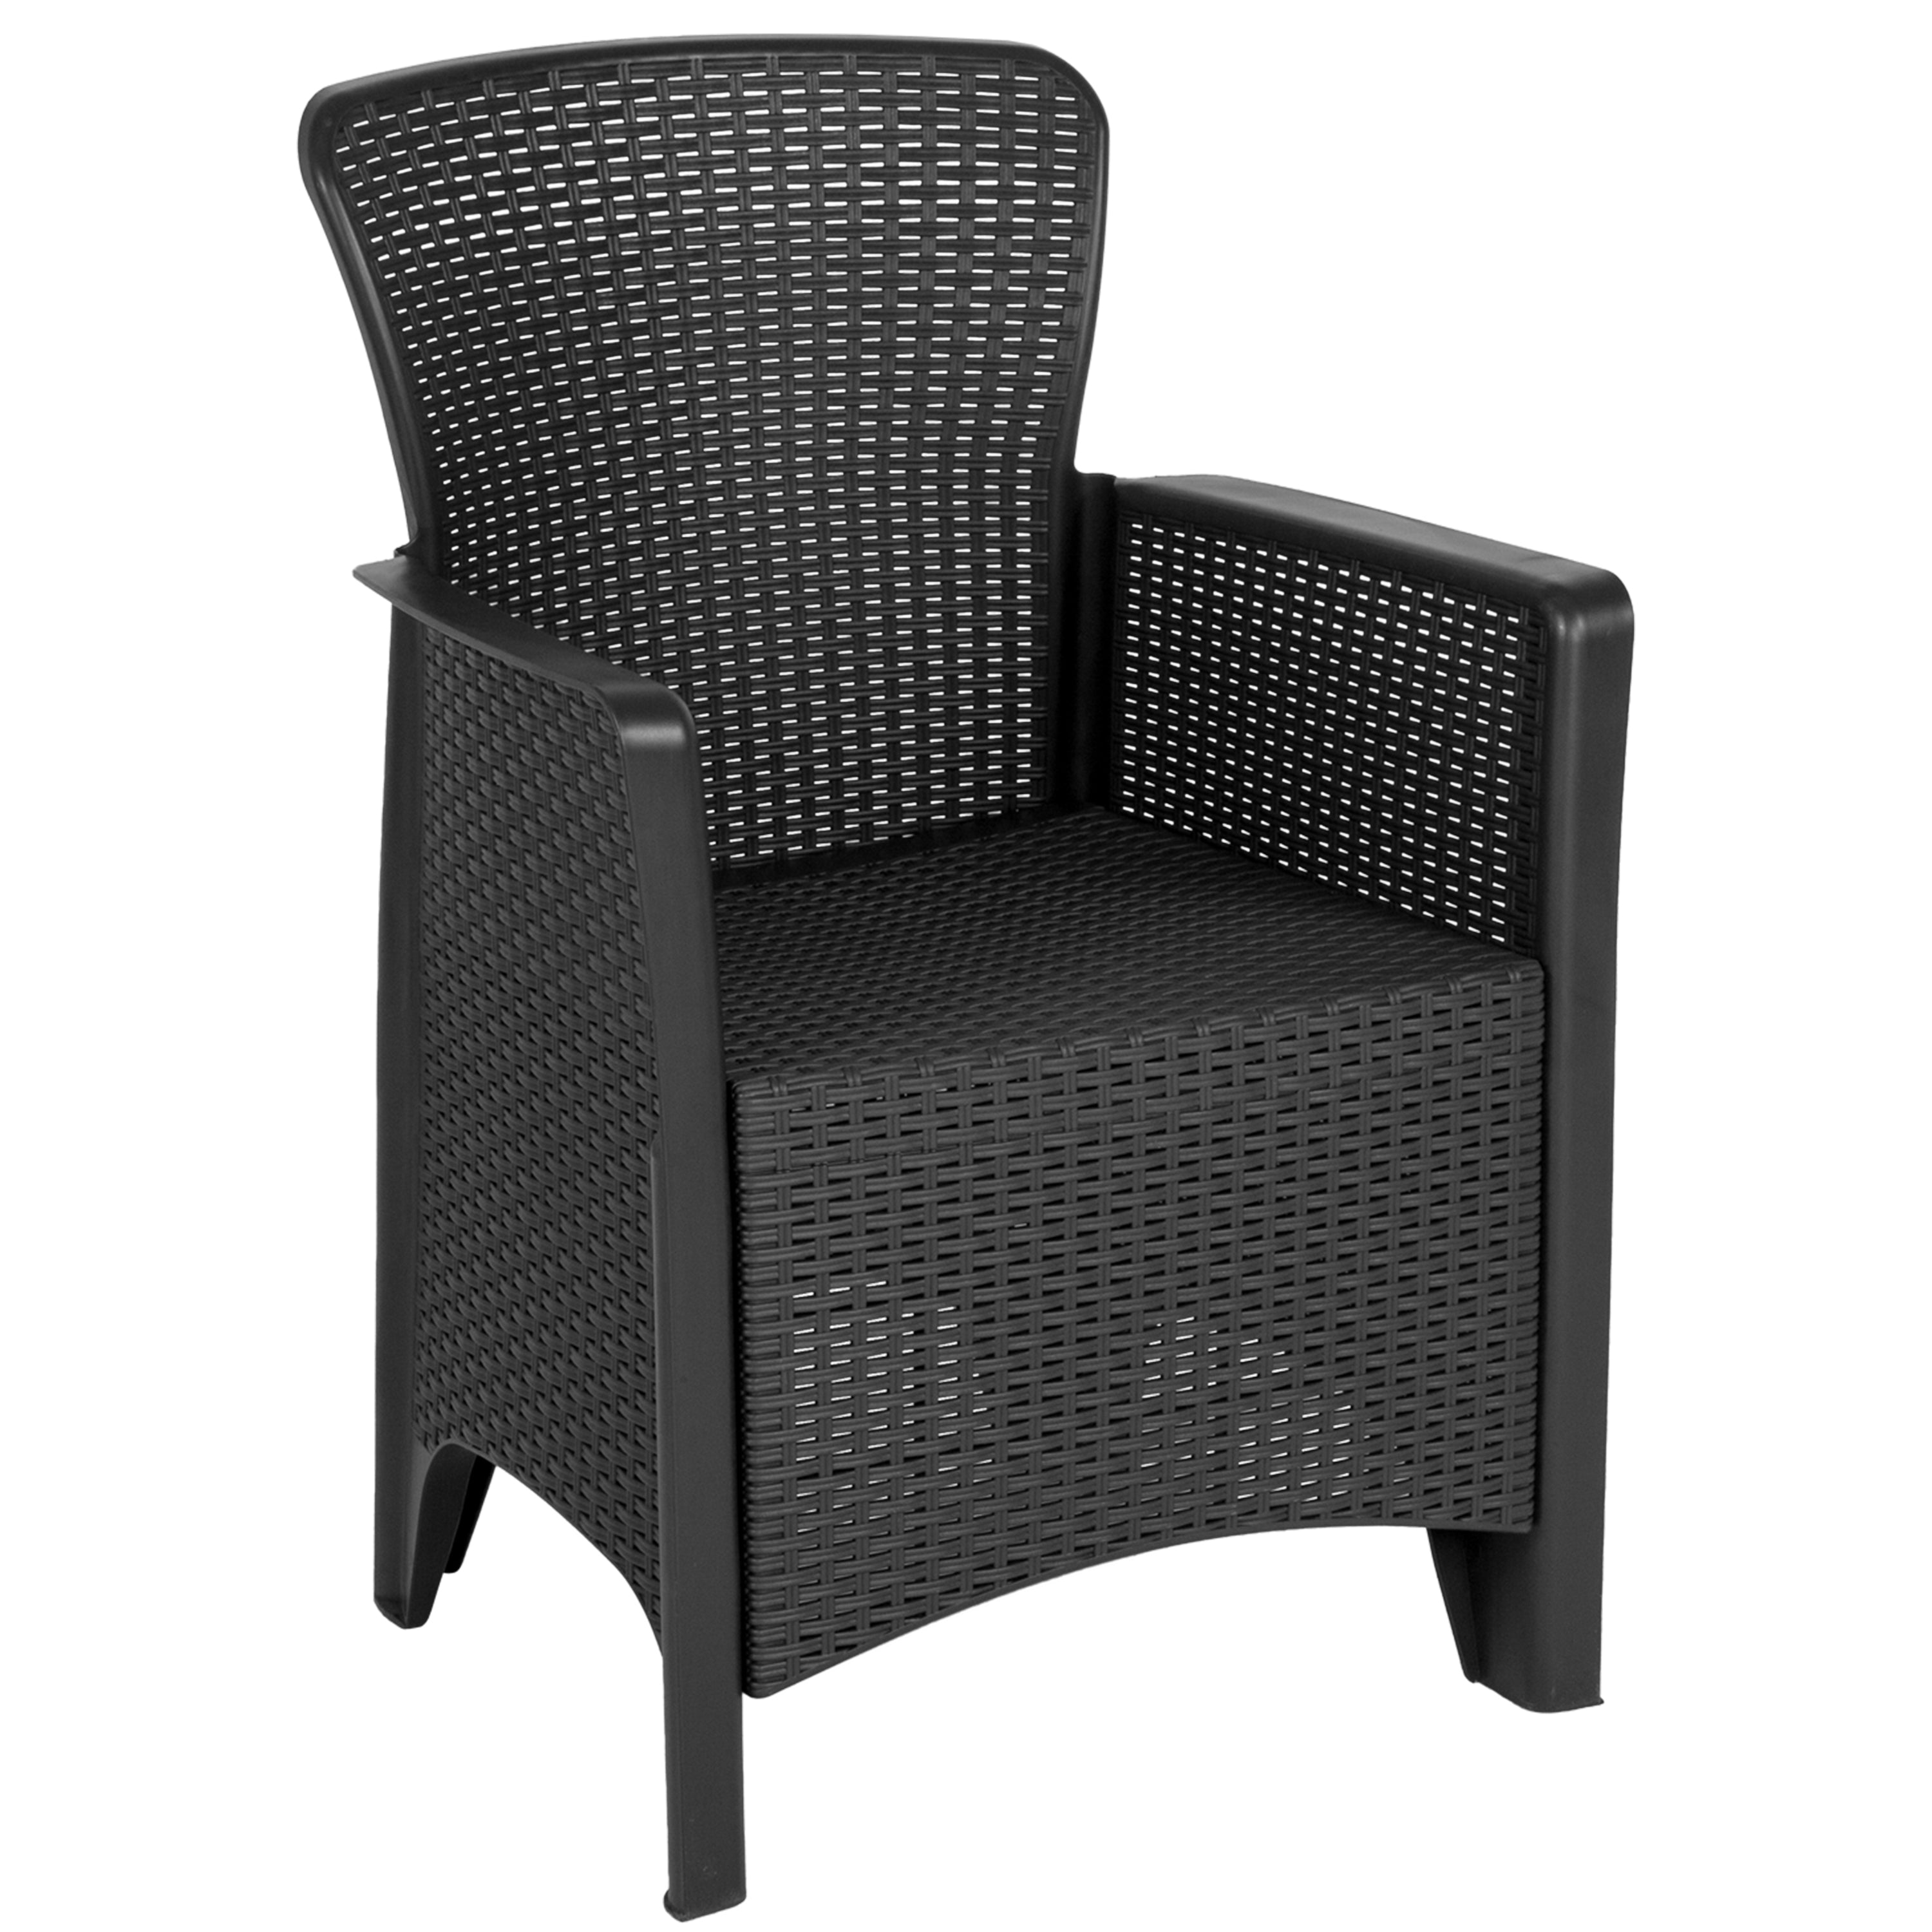 Seneca Faux Rattan Plastic Chair Set with Matching Side Table-Outdoor Set-Flash Furniture-Wall2Wall Furnishings